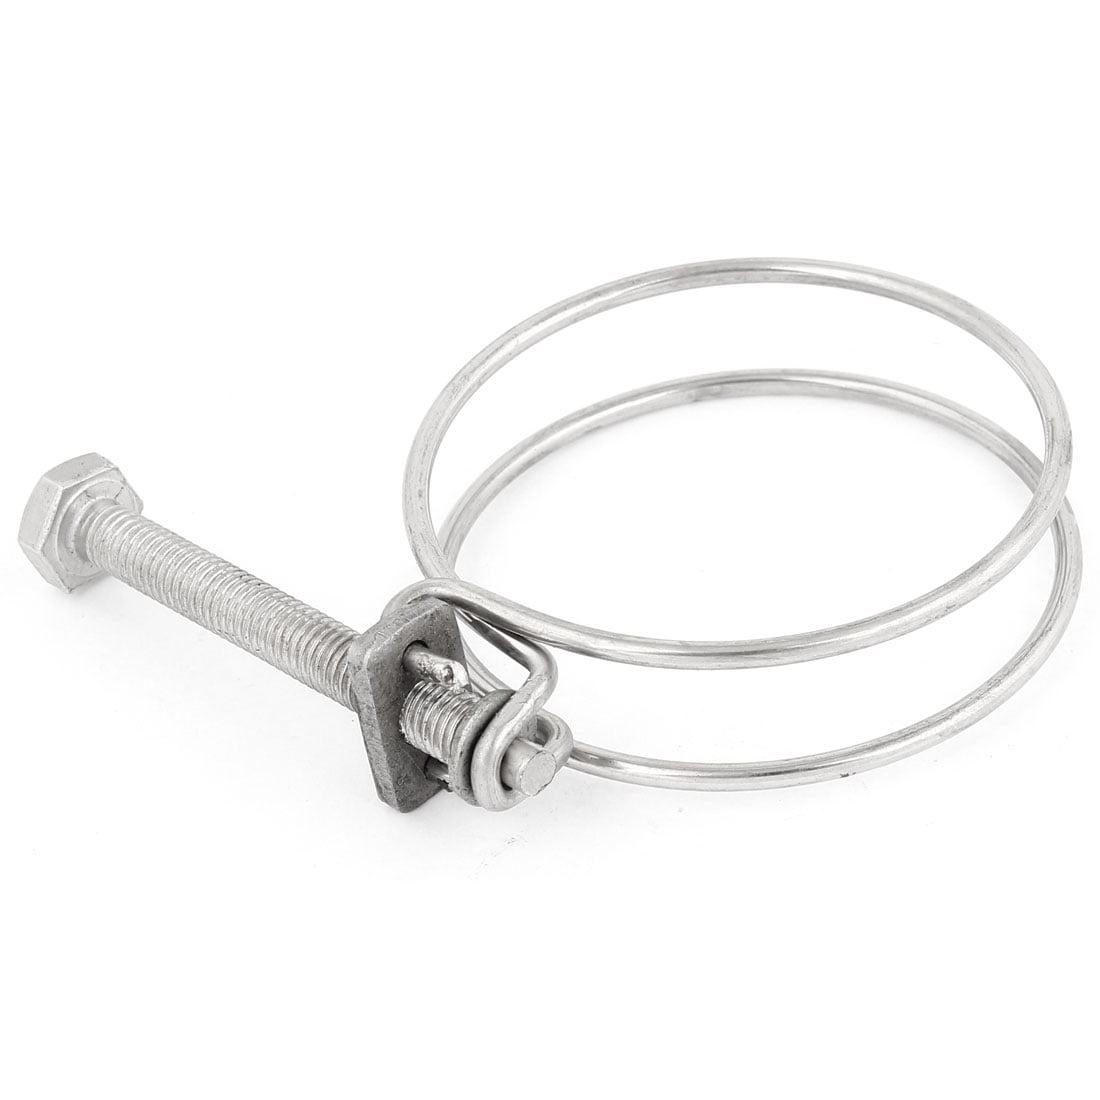 55mm-65mm Adjustable Range Water Gas Pipe Dual Wire Hose Clamp for sale online 